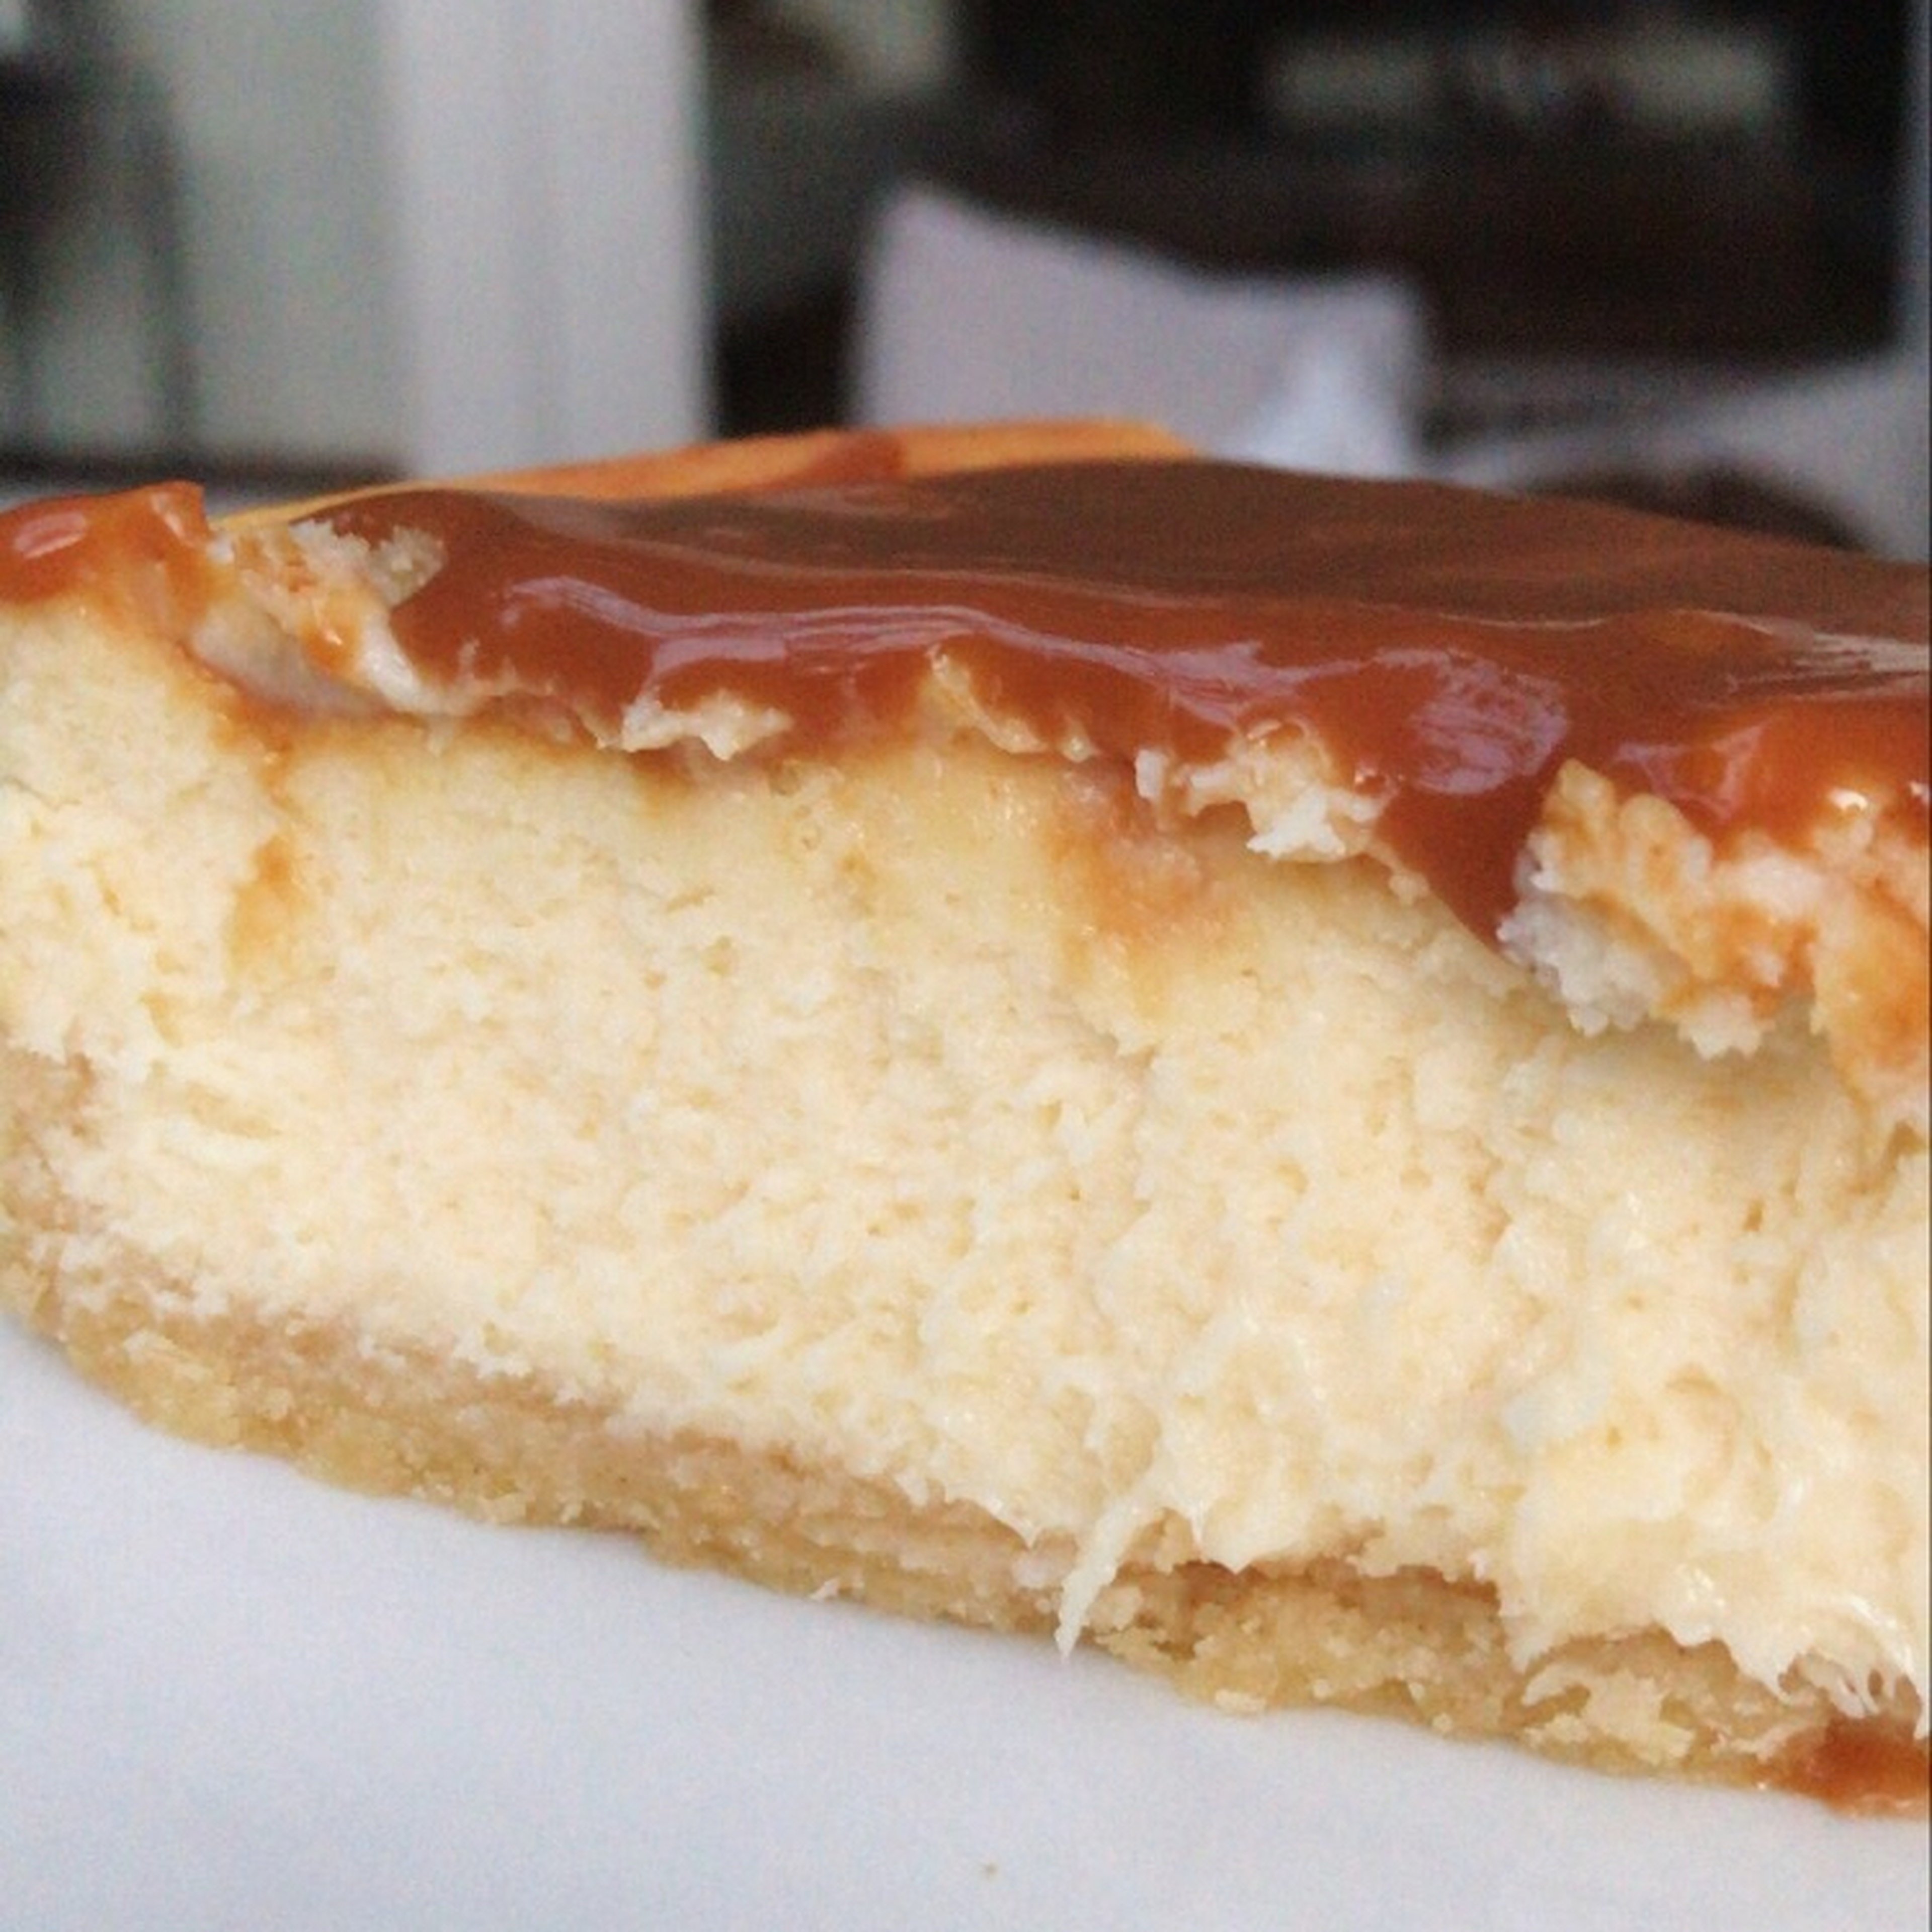 White Chocolate Cheesecake with Salted Caramel Sauce